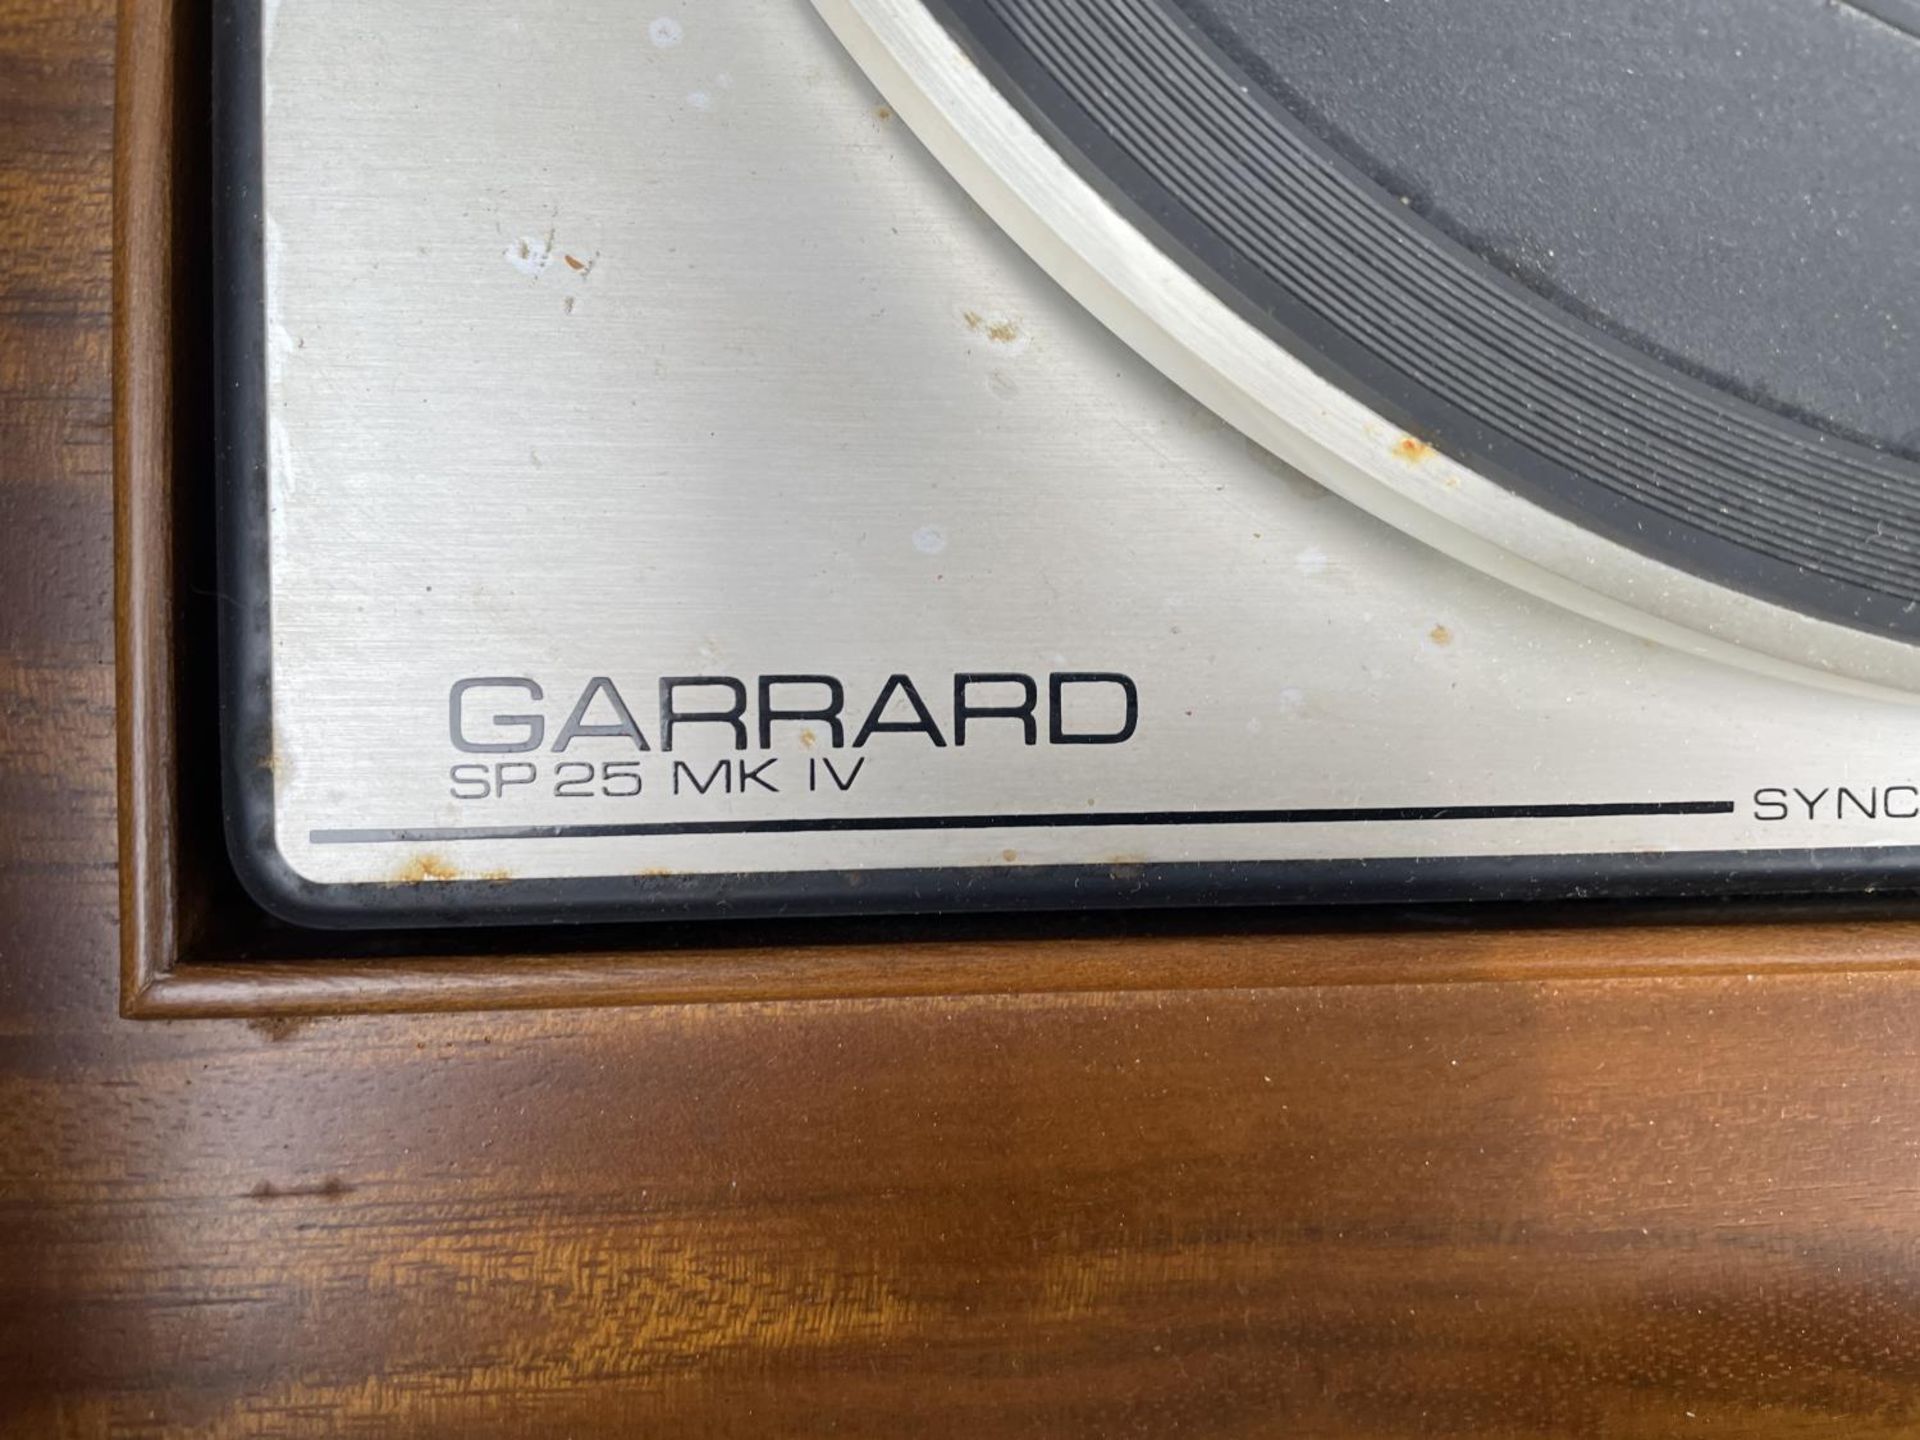 A DYNATRON YEW WOOD STEREO WITH GARRARD DECK COMPLETE WITH 2 SPEAKERS - Image 3 of 6